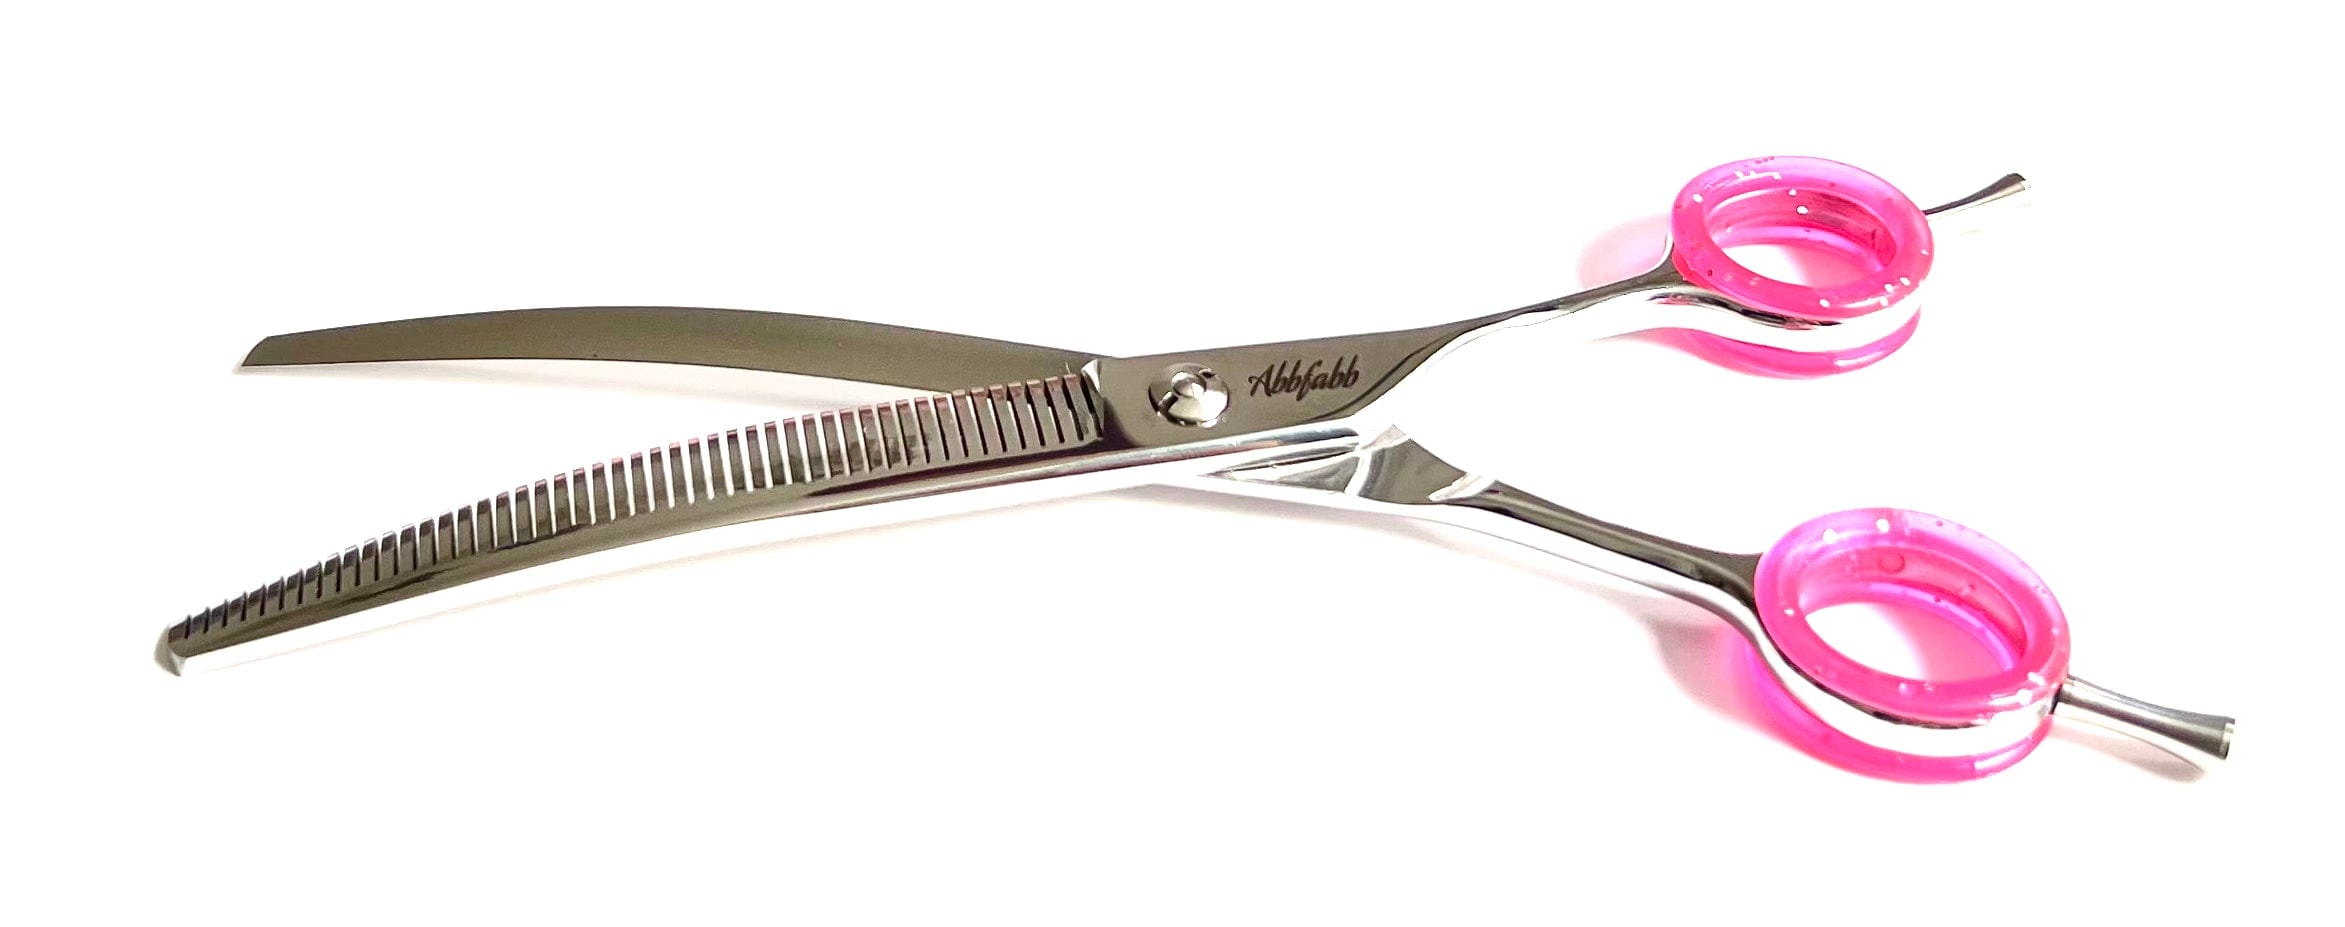 Abbfabb Grooming Scissors ltd 7.5" 40 Piano Teeth Reversible Curved Thinning Dog Grooming Scissor. 7.5" Flippable Curved Fluffer